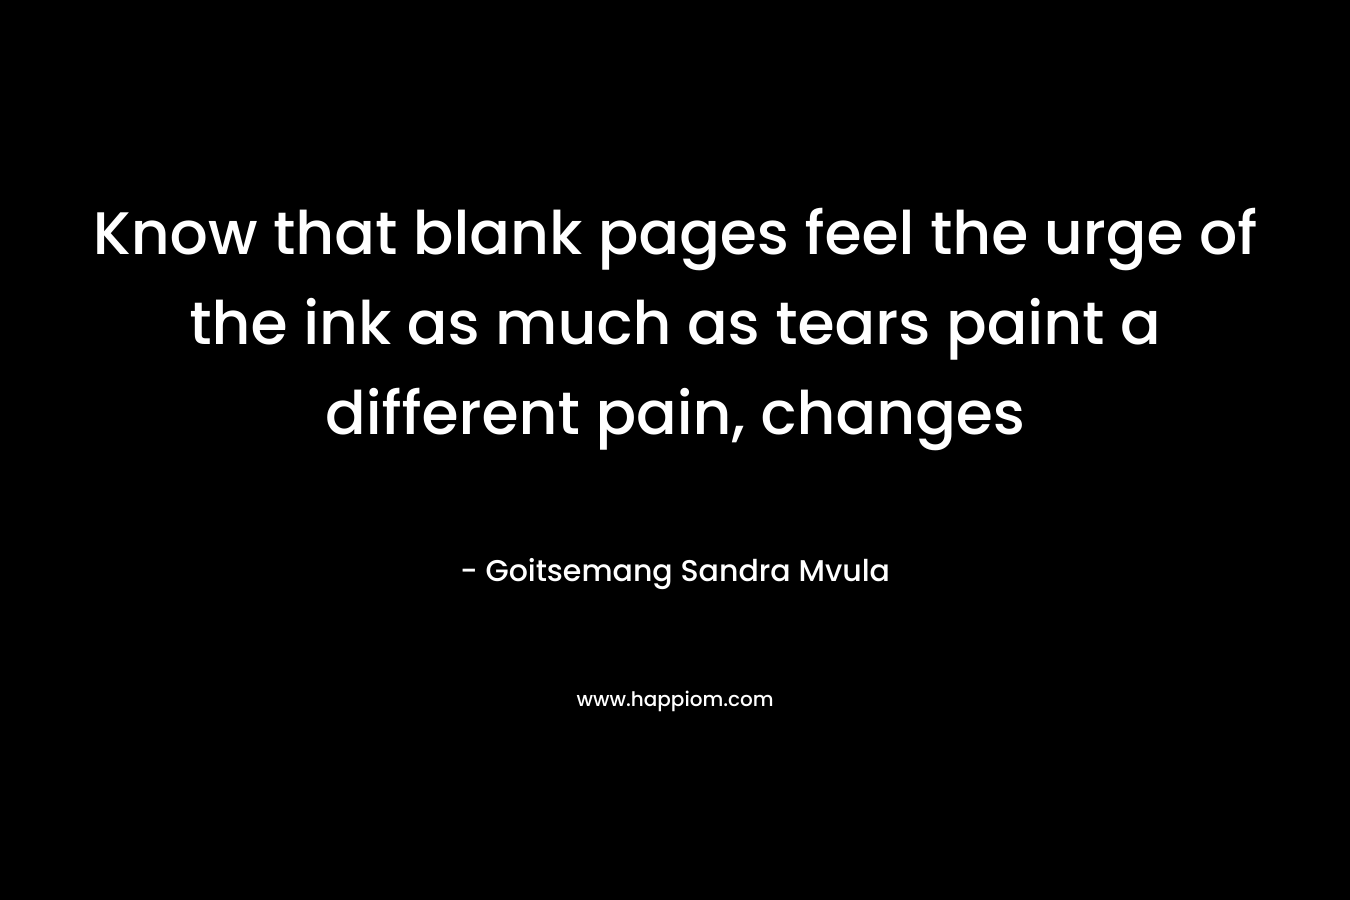 Know that blank pages feel the urge of the ink as much as tears paint a different pain, changes